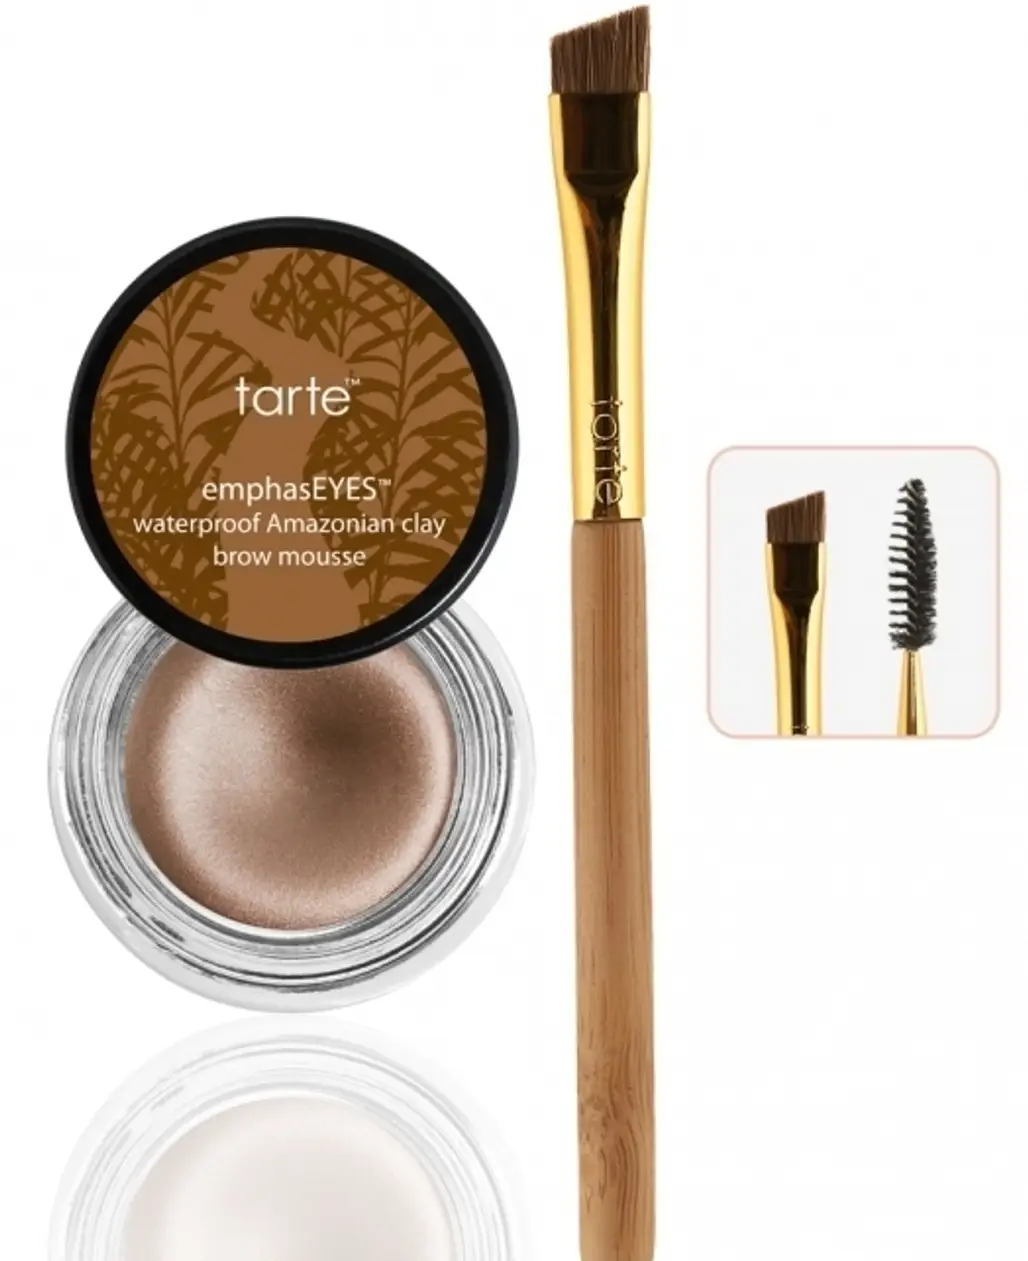 Tarte EmphasEYES Waterproof Amazonian Clay Brow Mousse